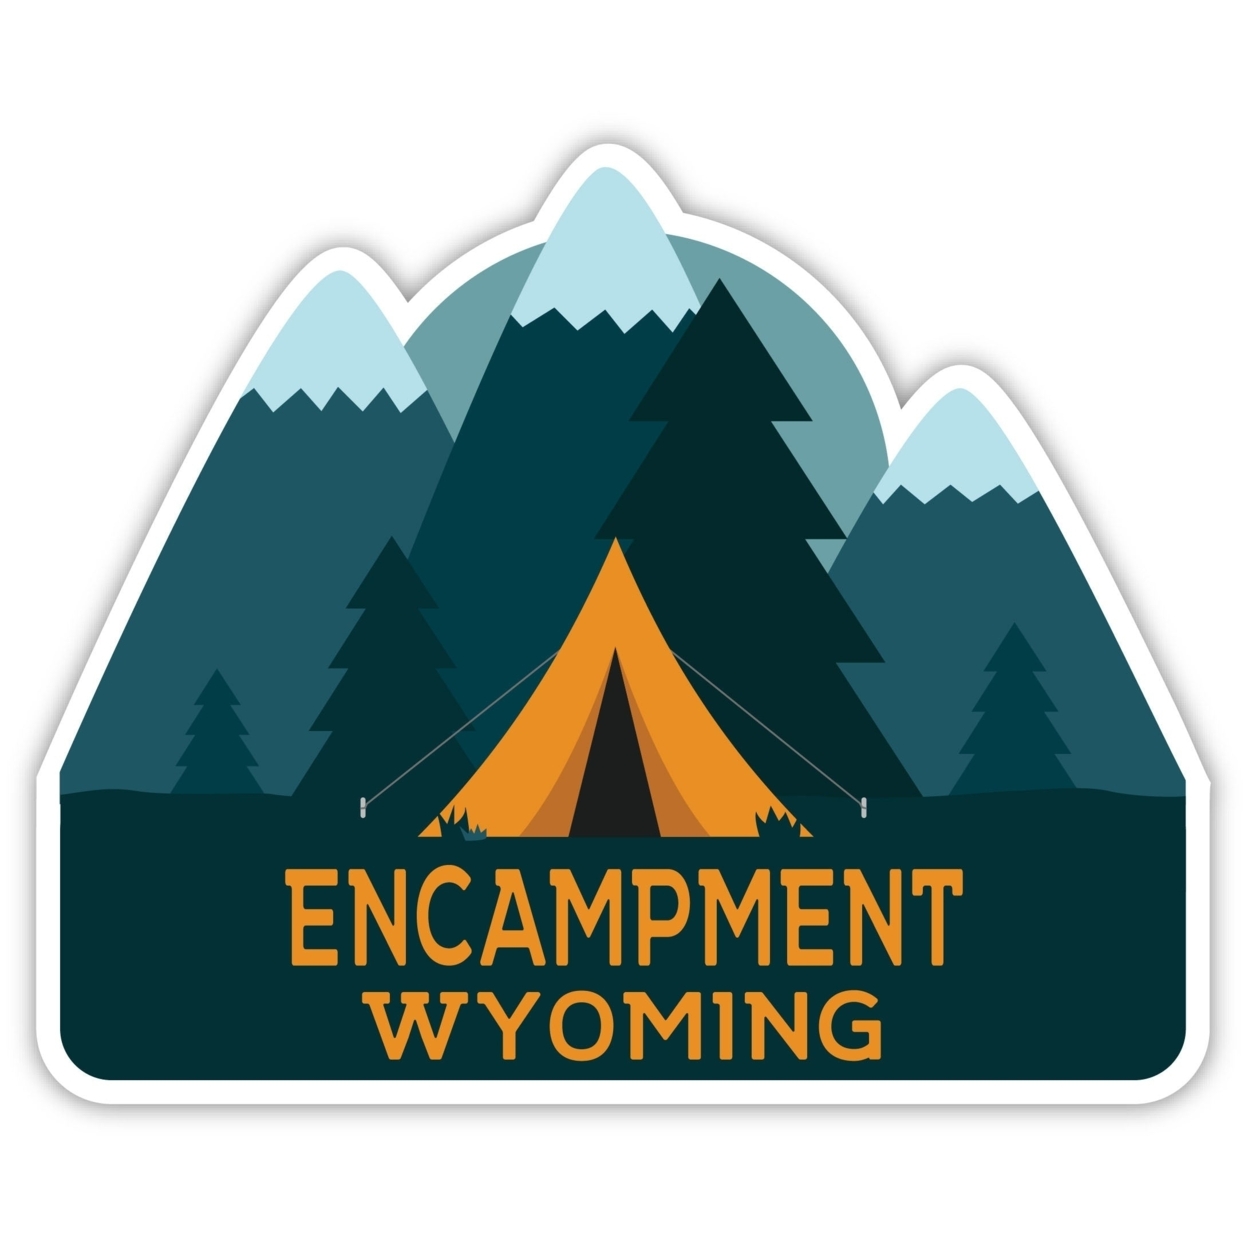 Encampment Wyoming Souvenir Decorative Stickers (Choose Theme And Size) - 4-Pack, 6-Inch, Tent